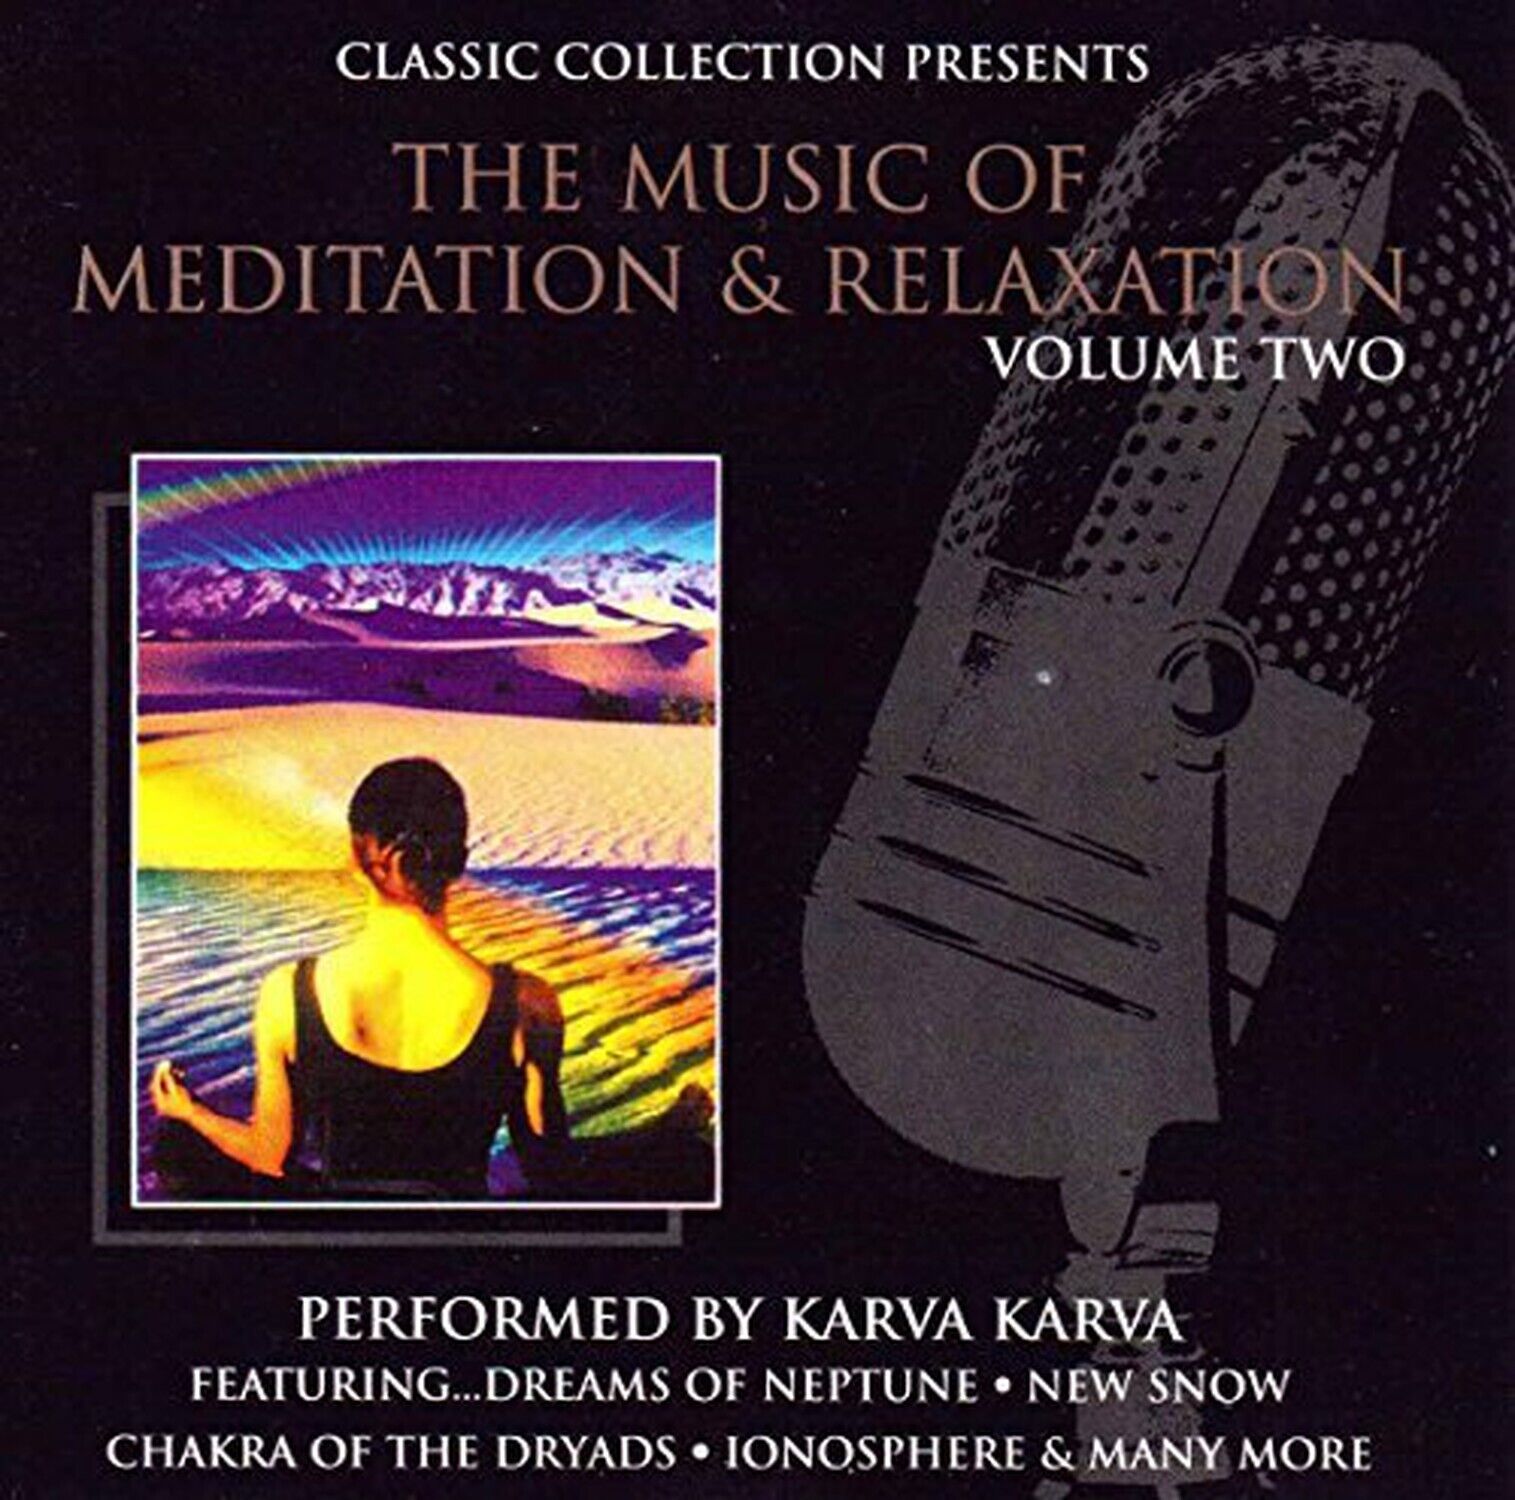 The Music of Meditation & Relaxation, Vol. 2 by Karva Karva